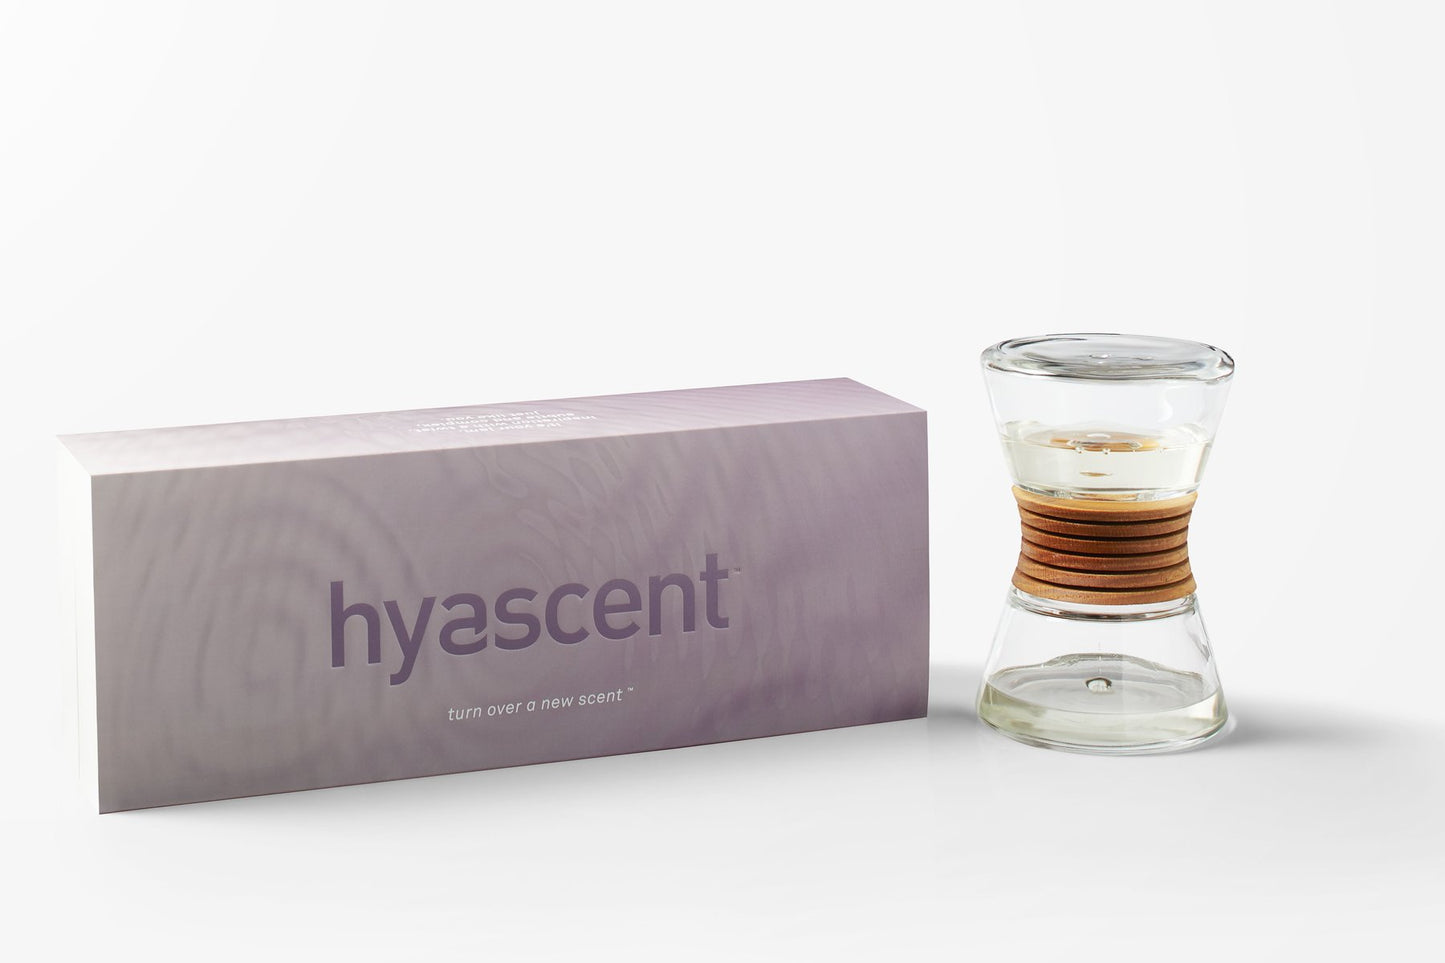 BLISS ME Hyascent Hourglass Home Fragrance Diffuser